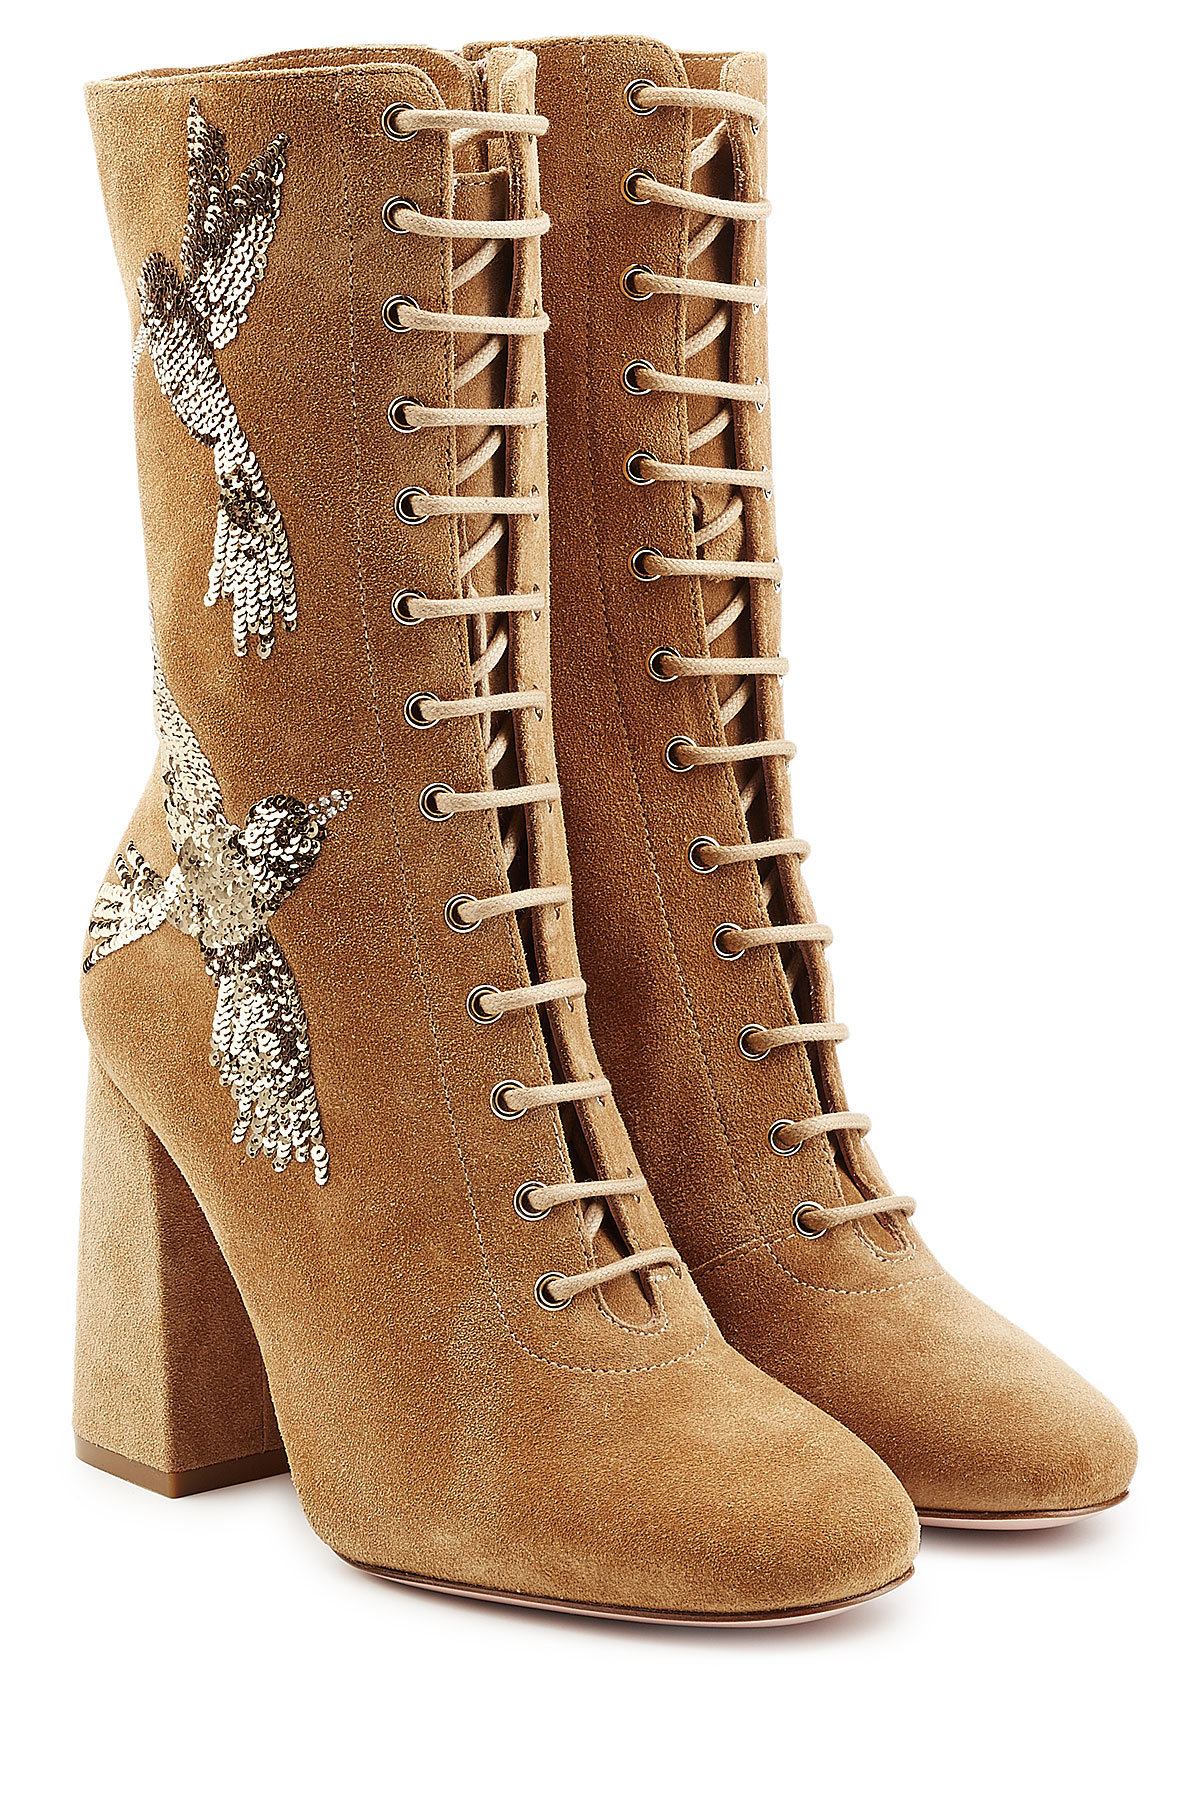 Red Valentino - Embroidered Lace-Up Suede Boots